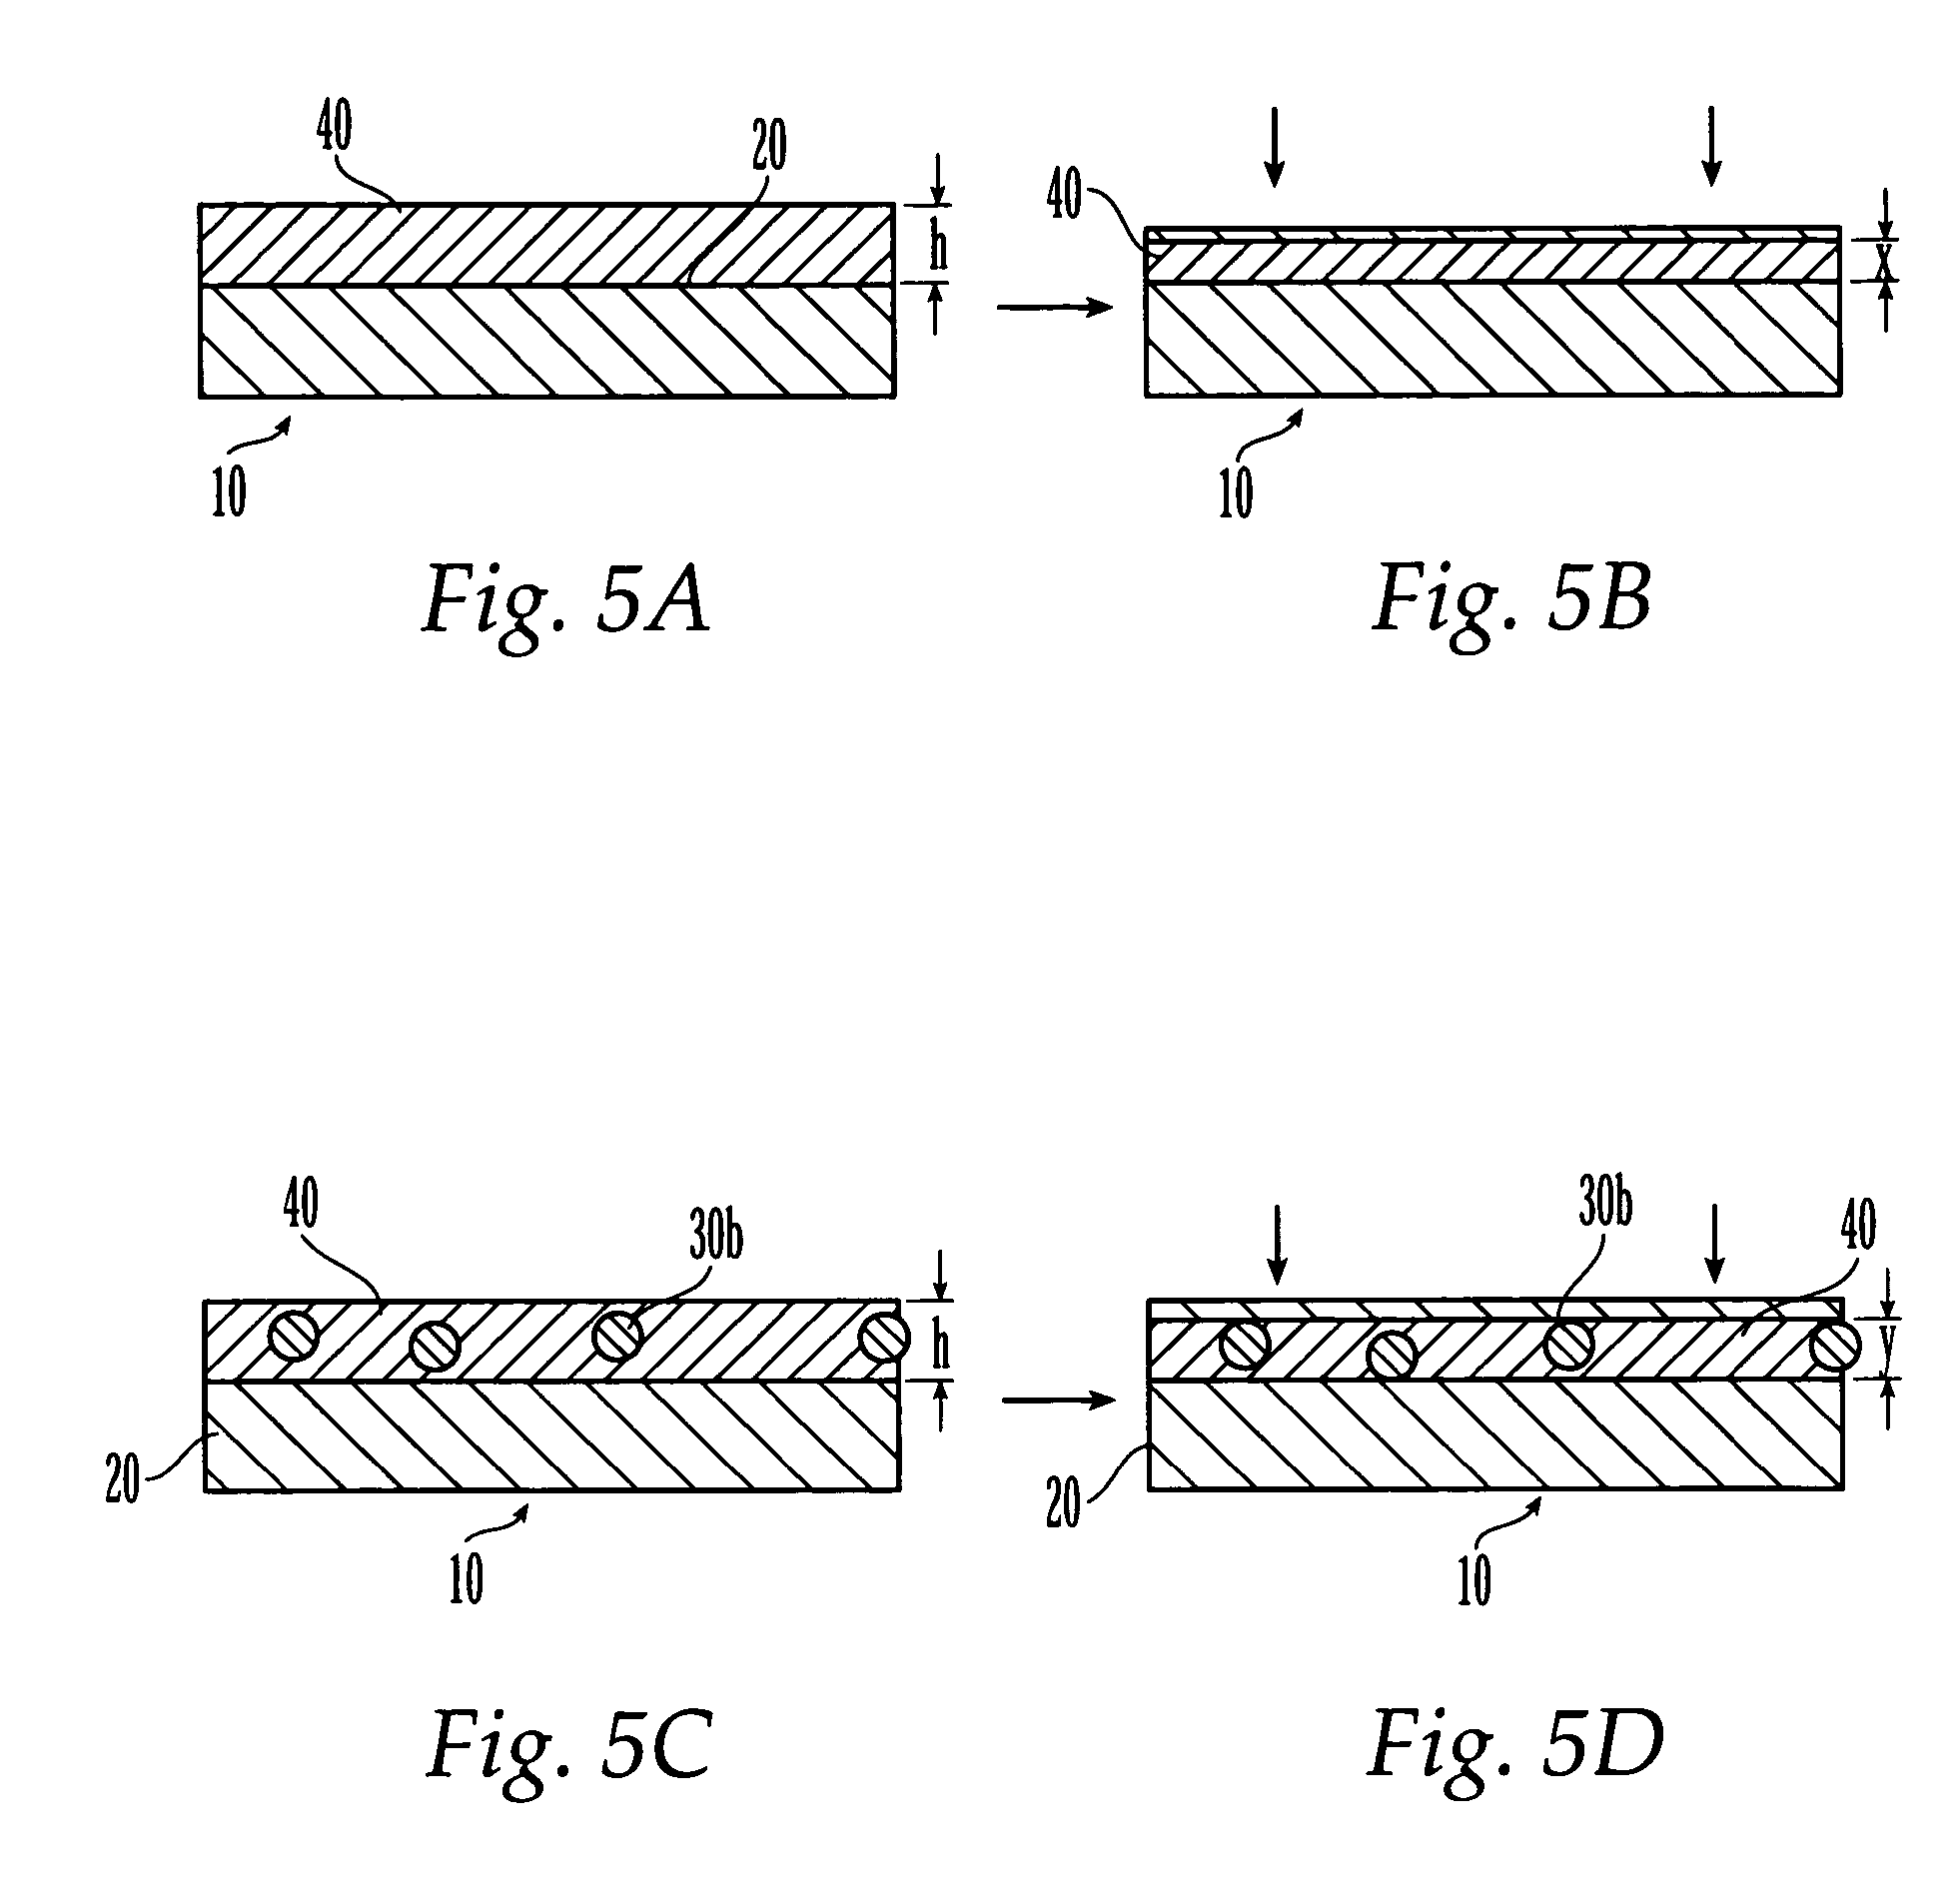 Medical device having a coating layer with structural elements therein and method of making the same